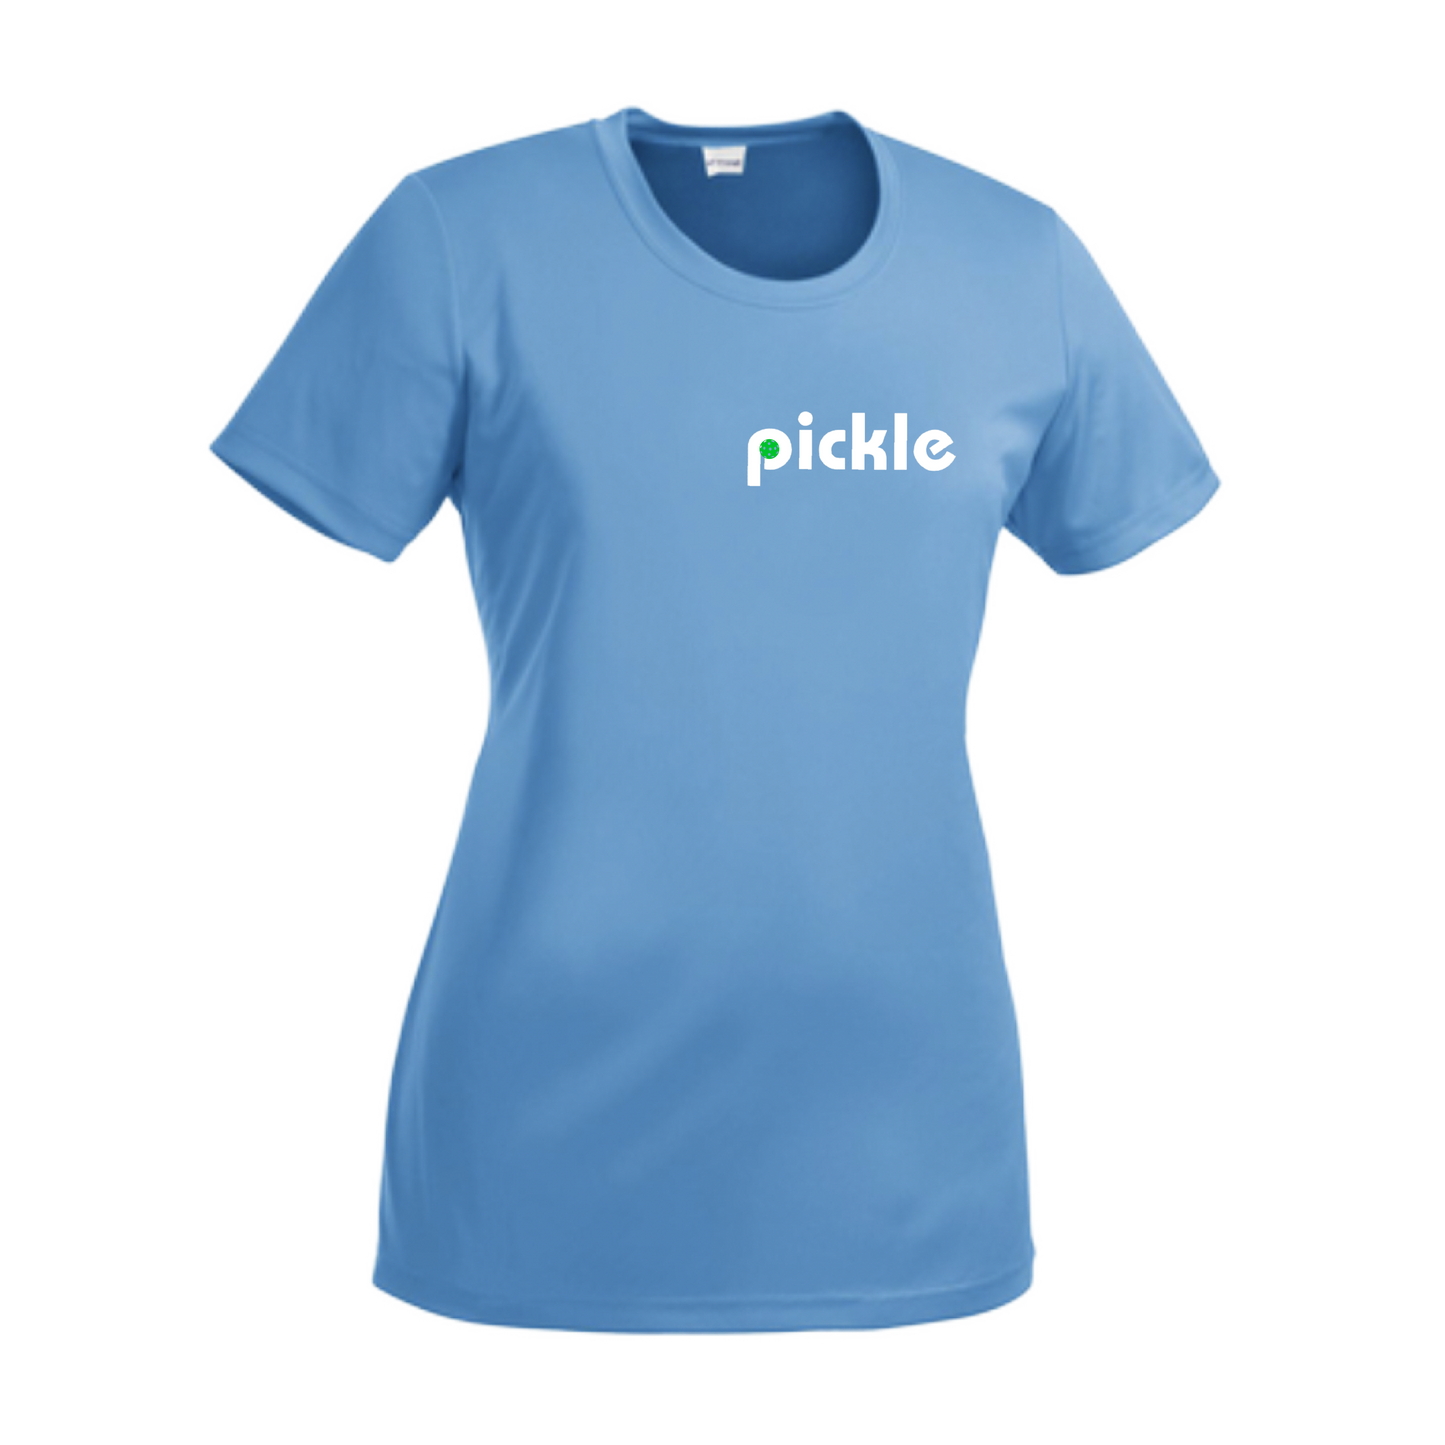 This short-sleeved crew-neck shirt is designed specifically for pickleball enthusiasts. Lightweight, roomy, and breathable, it is also equipped with PosiCharge technology to lock in color and maintain vibrant logos. Additionally, removable tags and set-in sleeves add comfort and ease of movement. With PosiCharge, designs stay sharp and clear, providing the perfect look for active lifestyles. Its moisture-wicking fabric helps keep you comfortable and cool, allowing you to stay focused on the gam